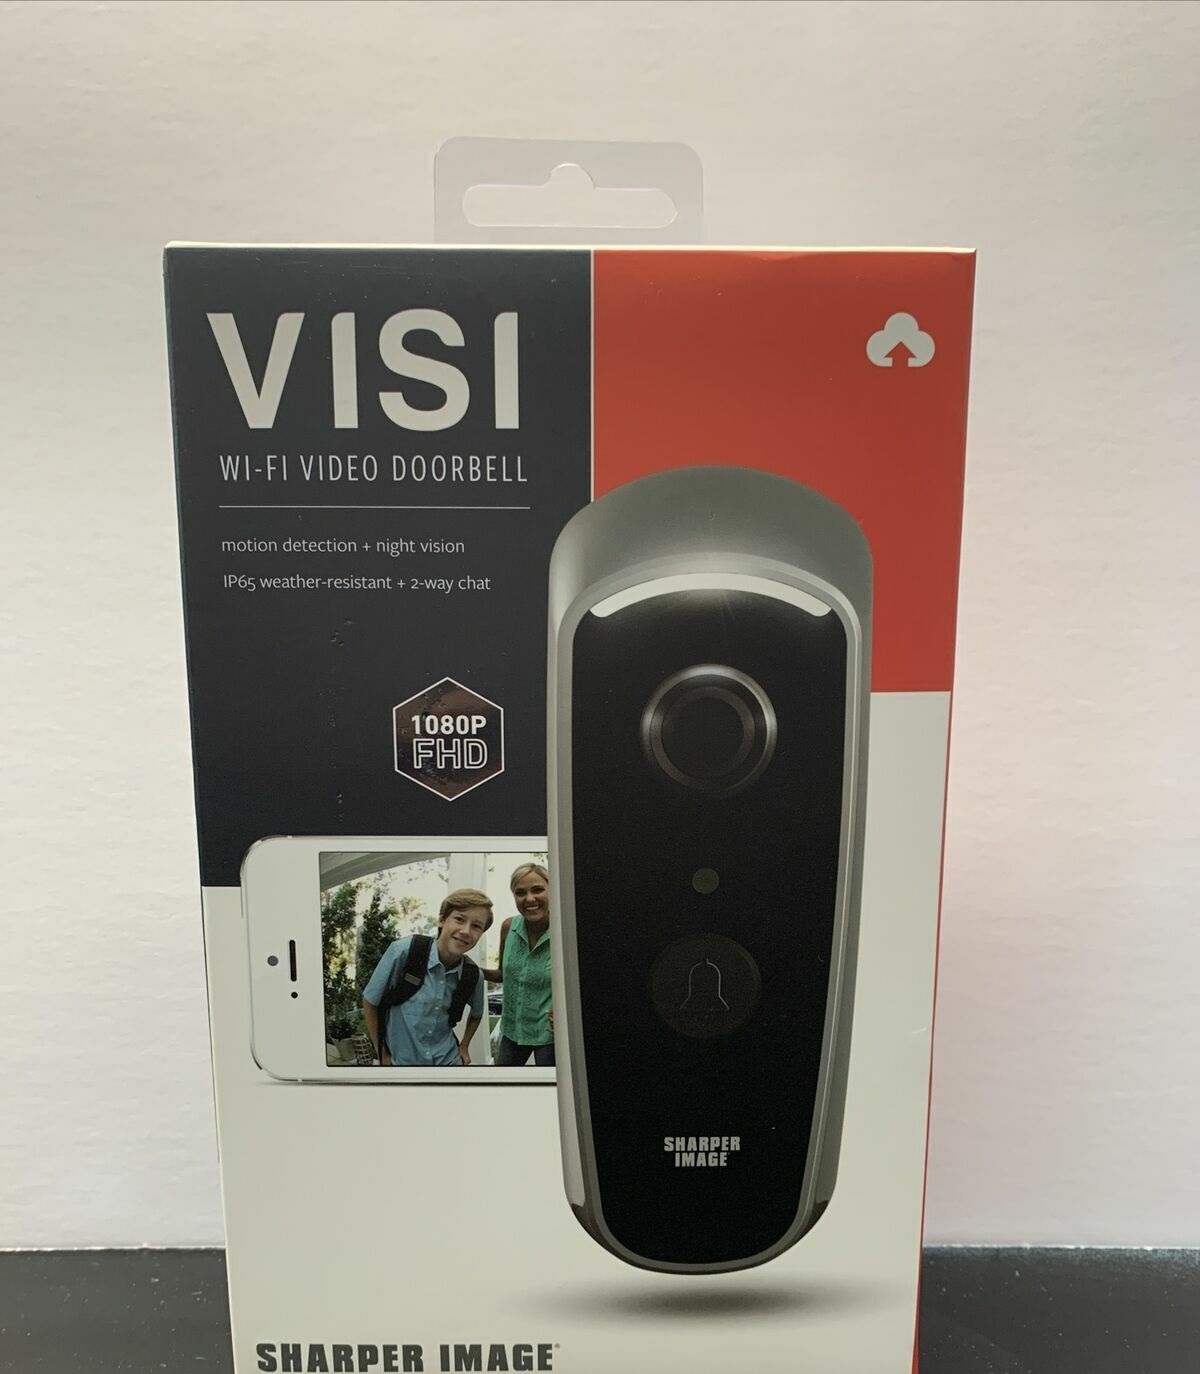 How To Install Visi Wi-Fi Video Doorbell Sharper Image